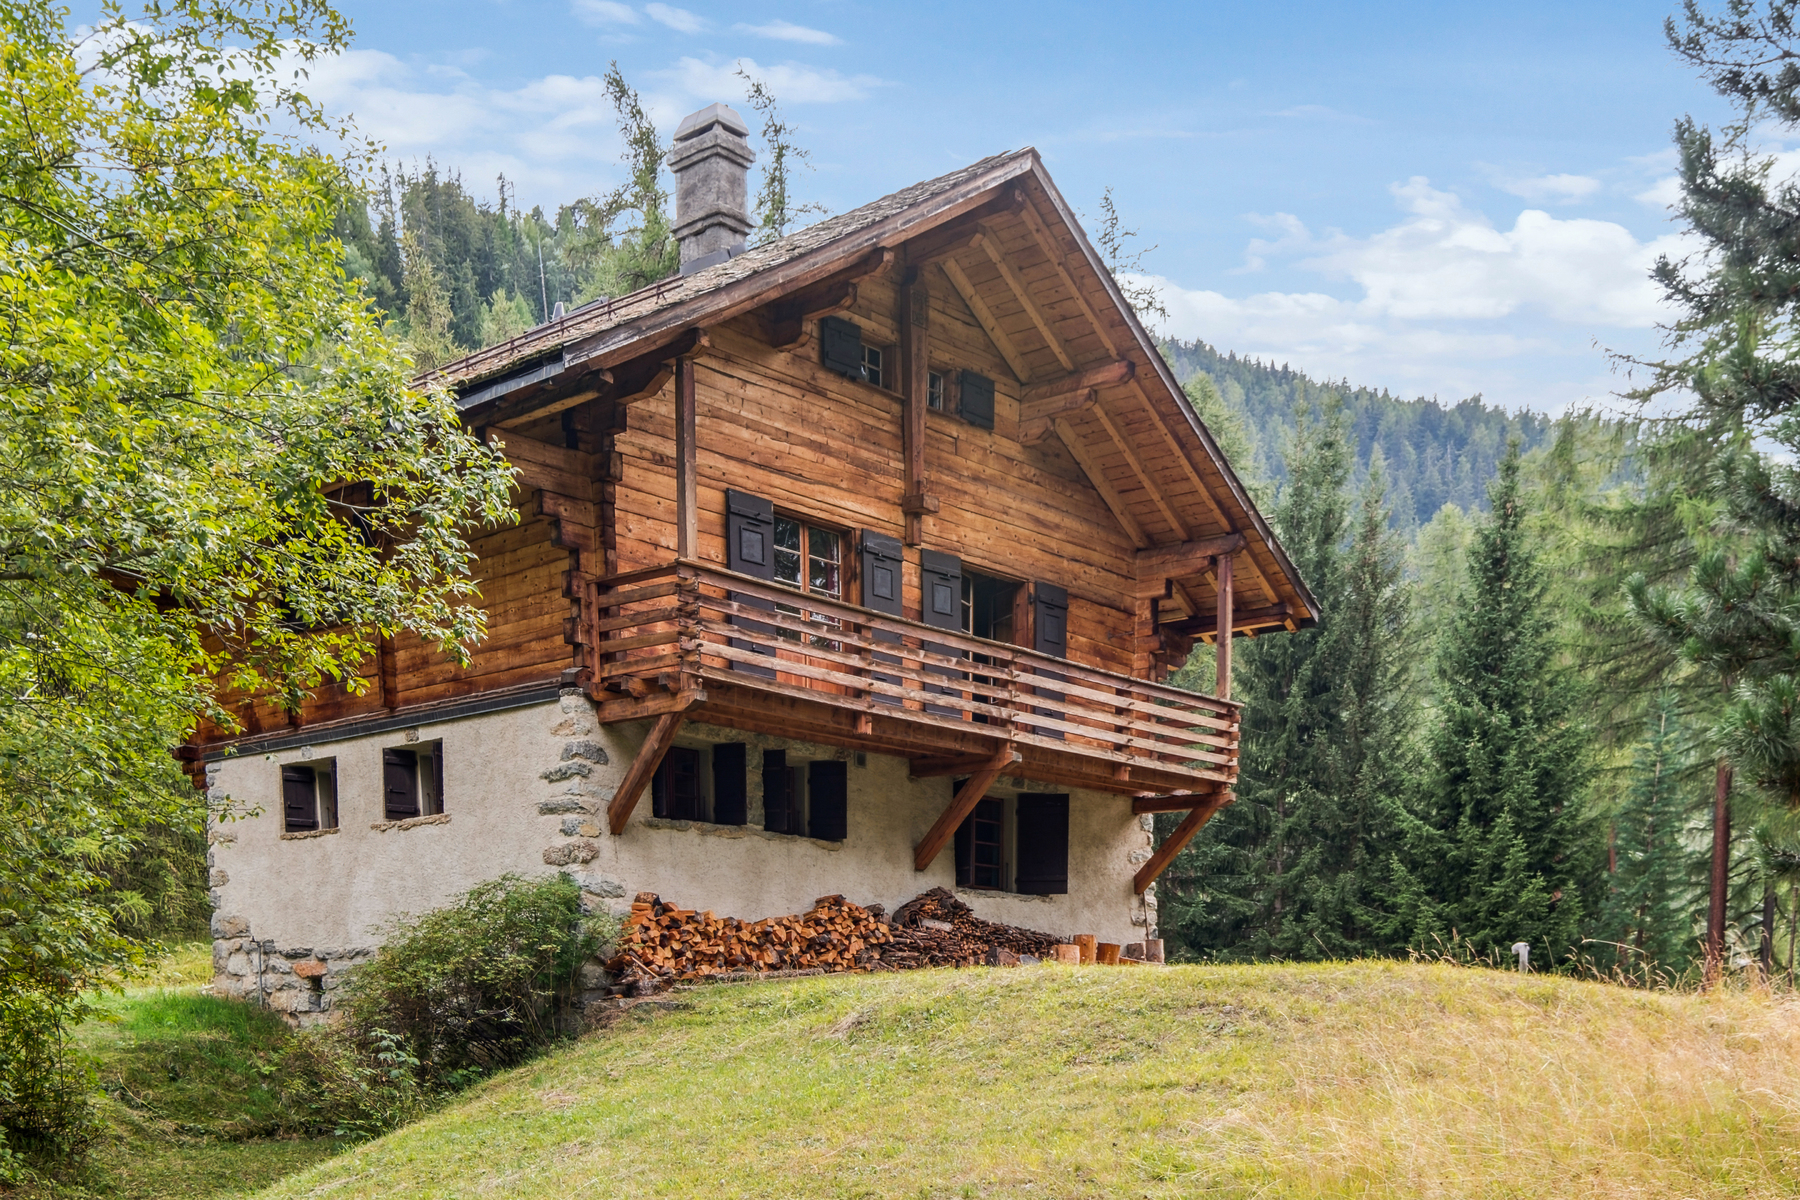 Chalet ?La Metralie? in the heart of the larch forest, rejuvenating